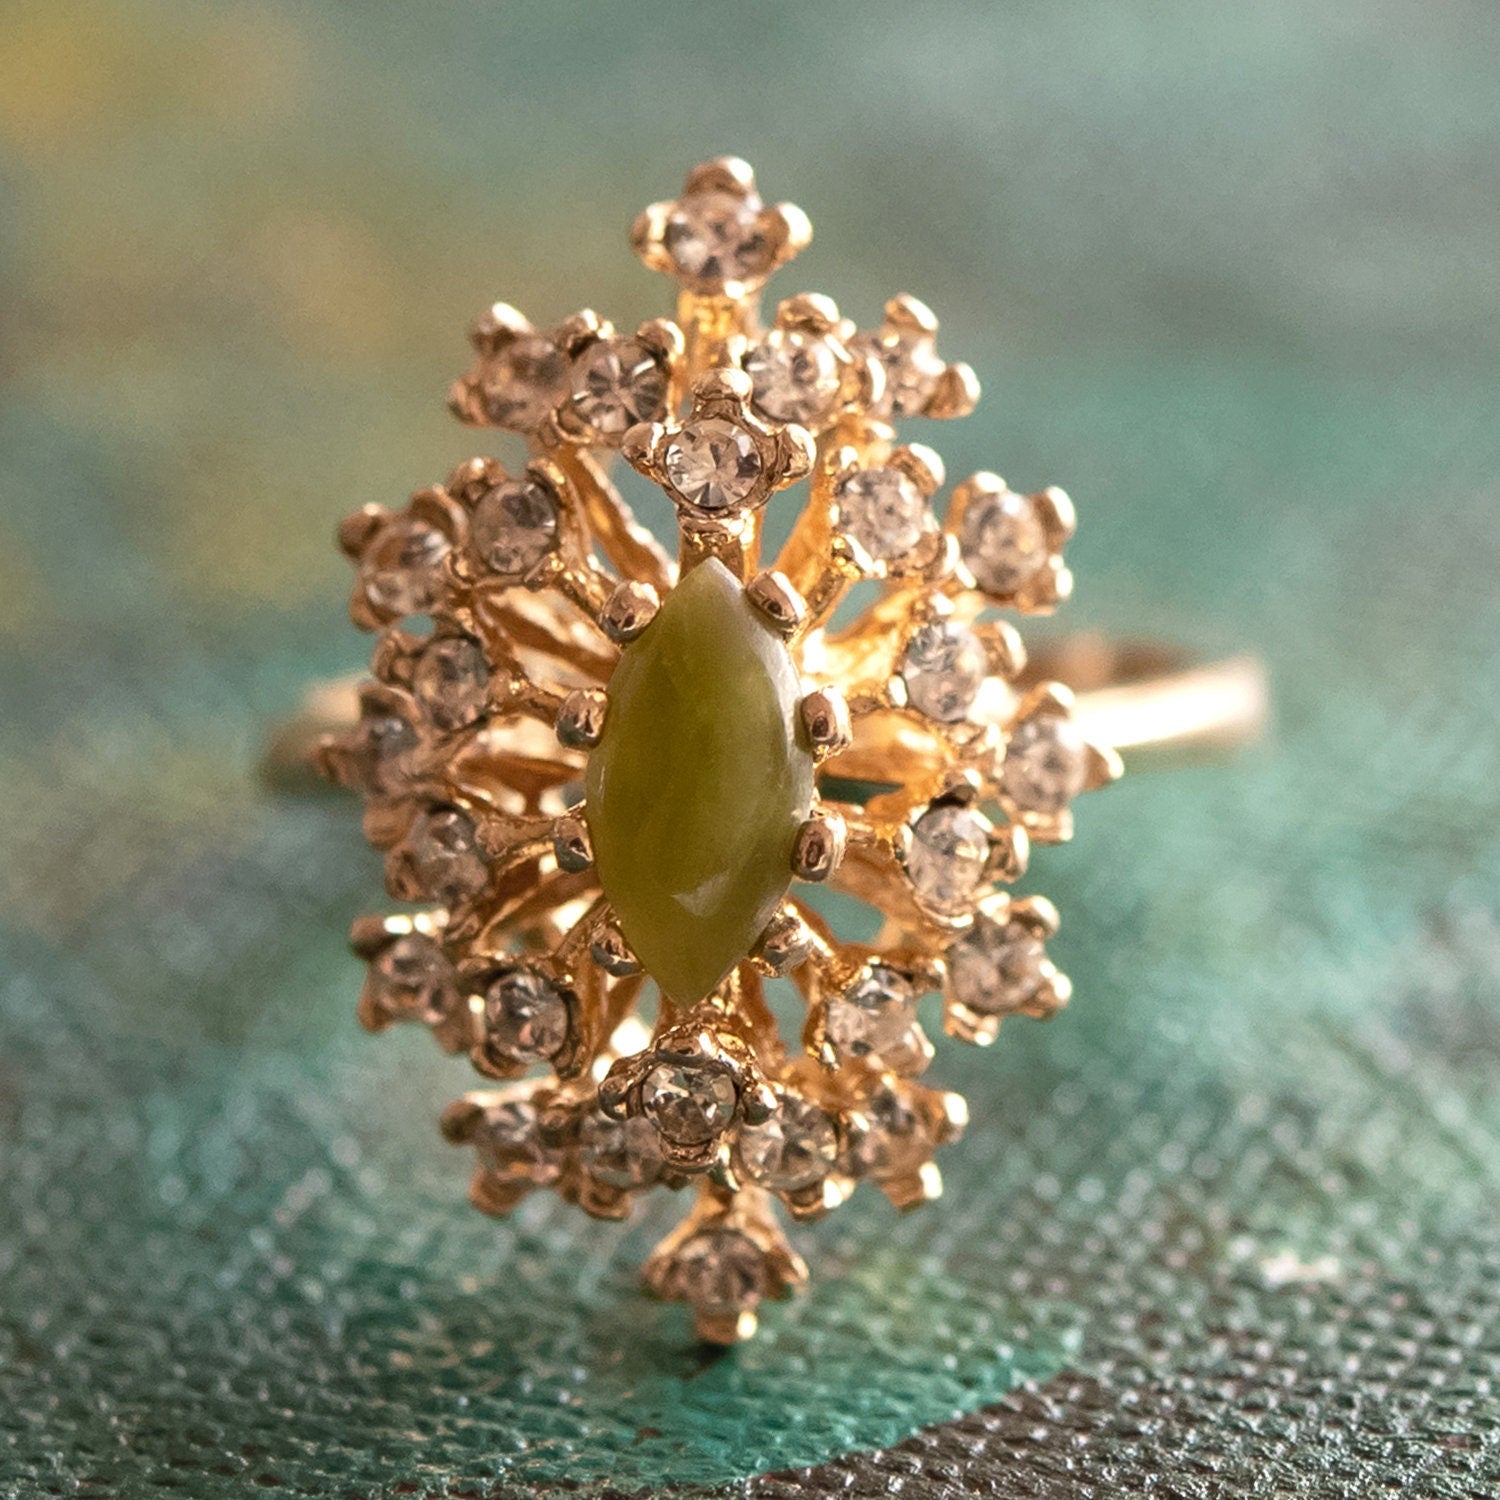 Vintage Ring Genuine Jade Surrounded by Clear Swarovski Crystals Cocktail Ring 18k Gold R221 Antique Womans - Limited Stock - Never Worn